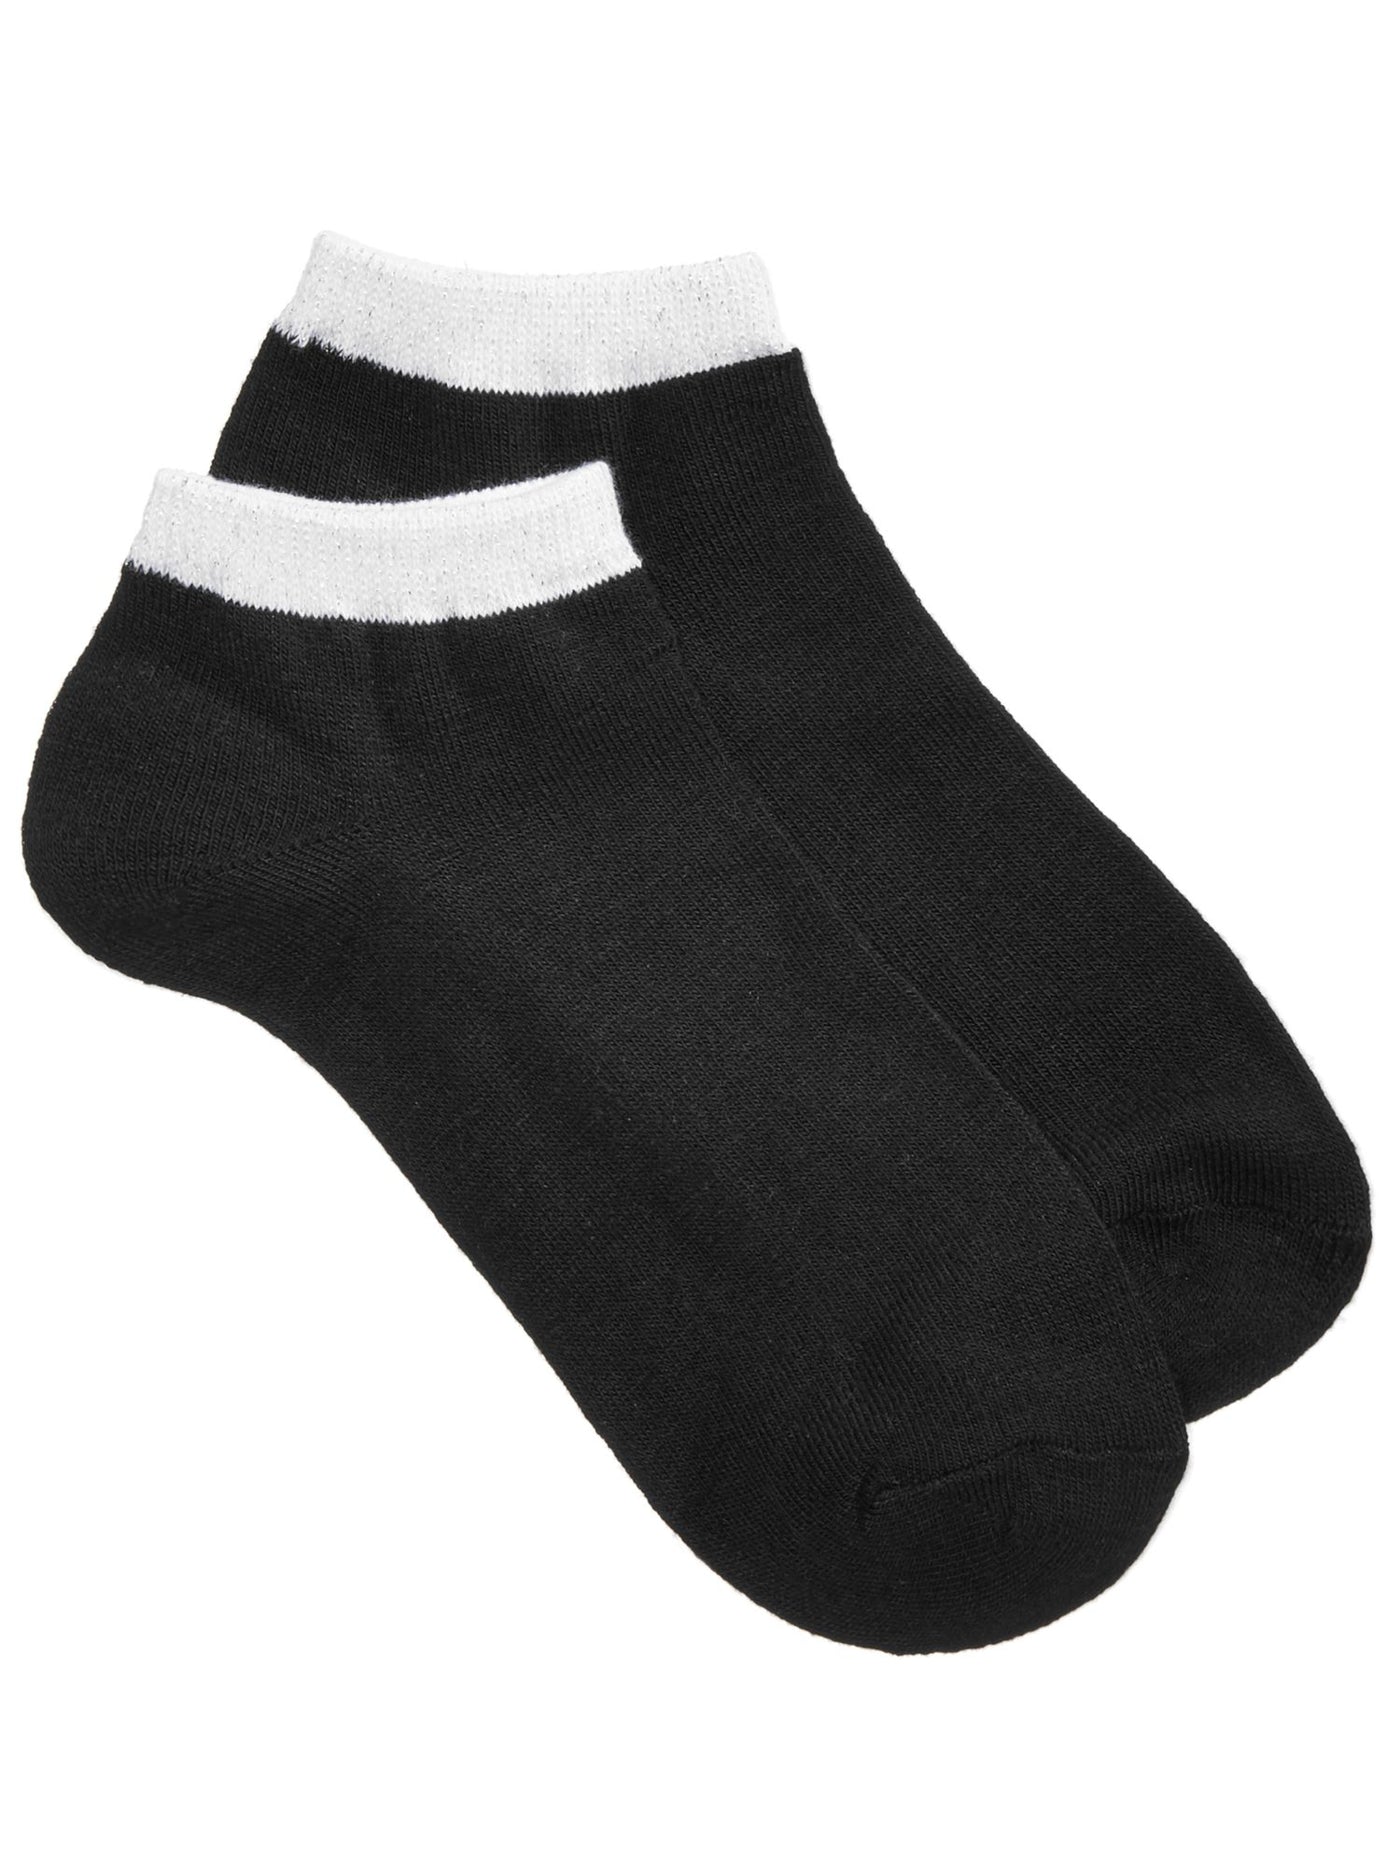 INC Womens Black Solid Contrast Trim Metallic Knit Ribbed Casual Ankle Socks